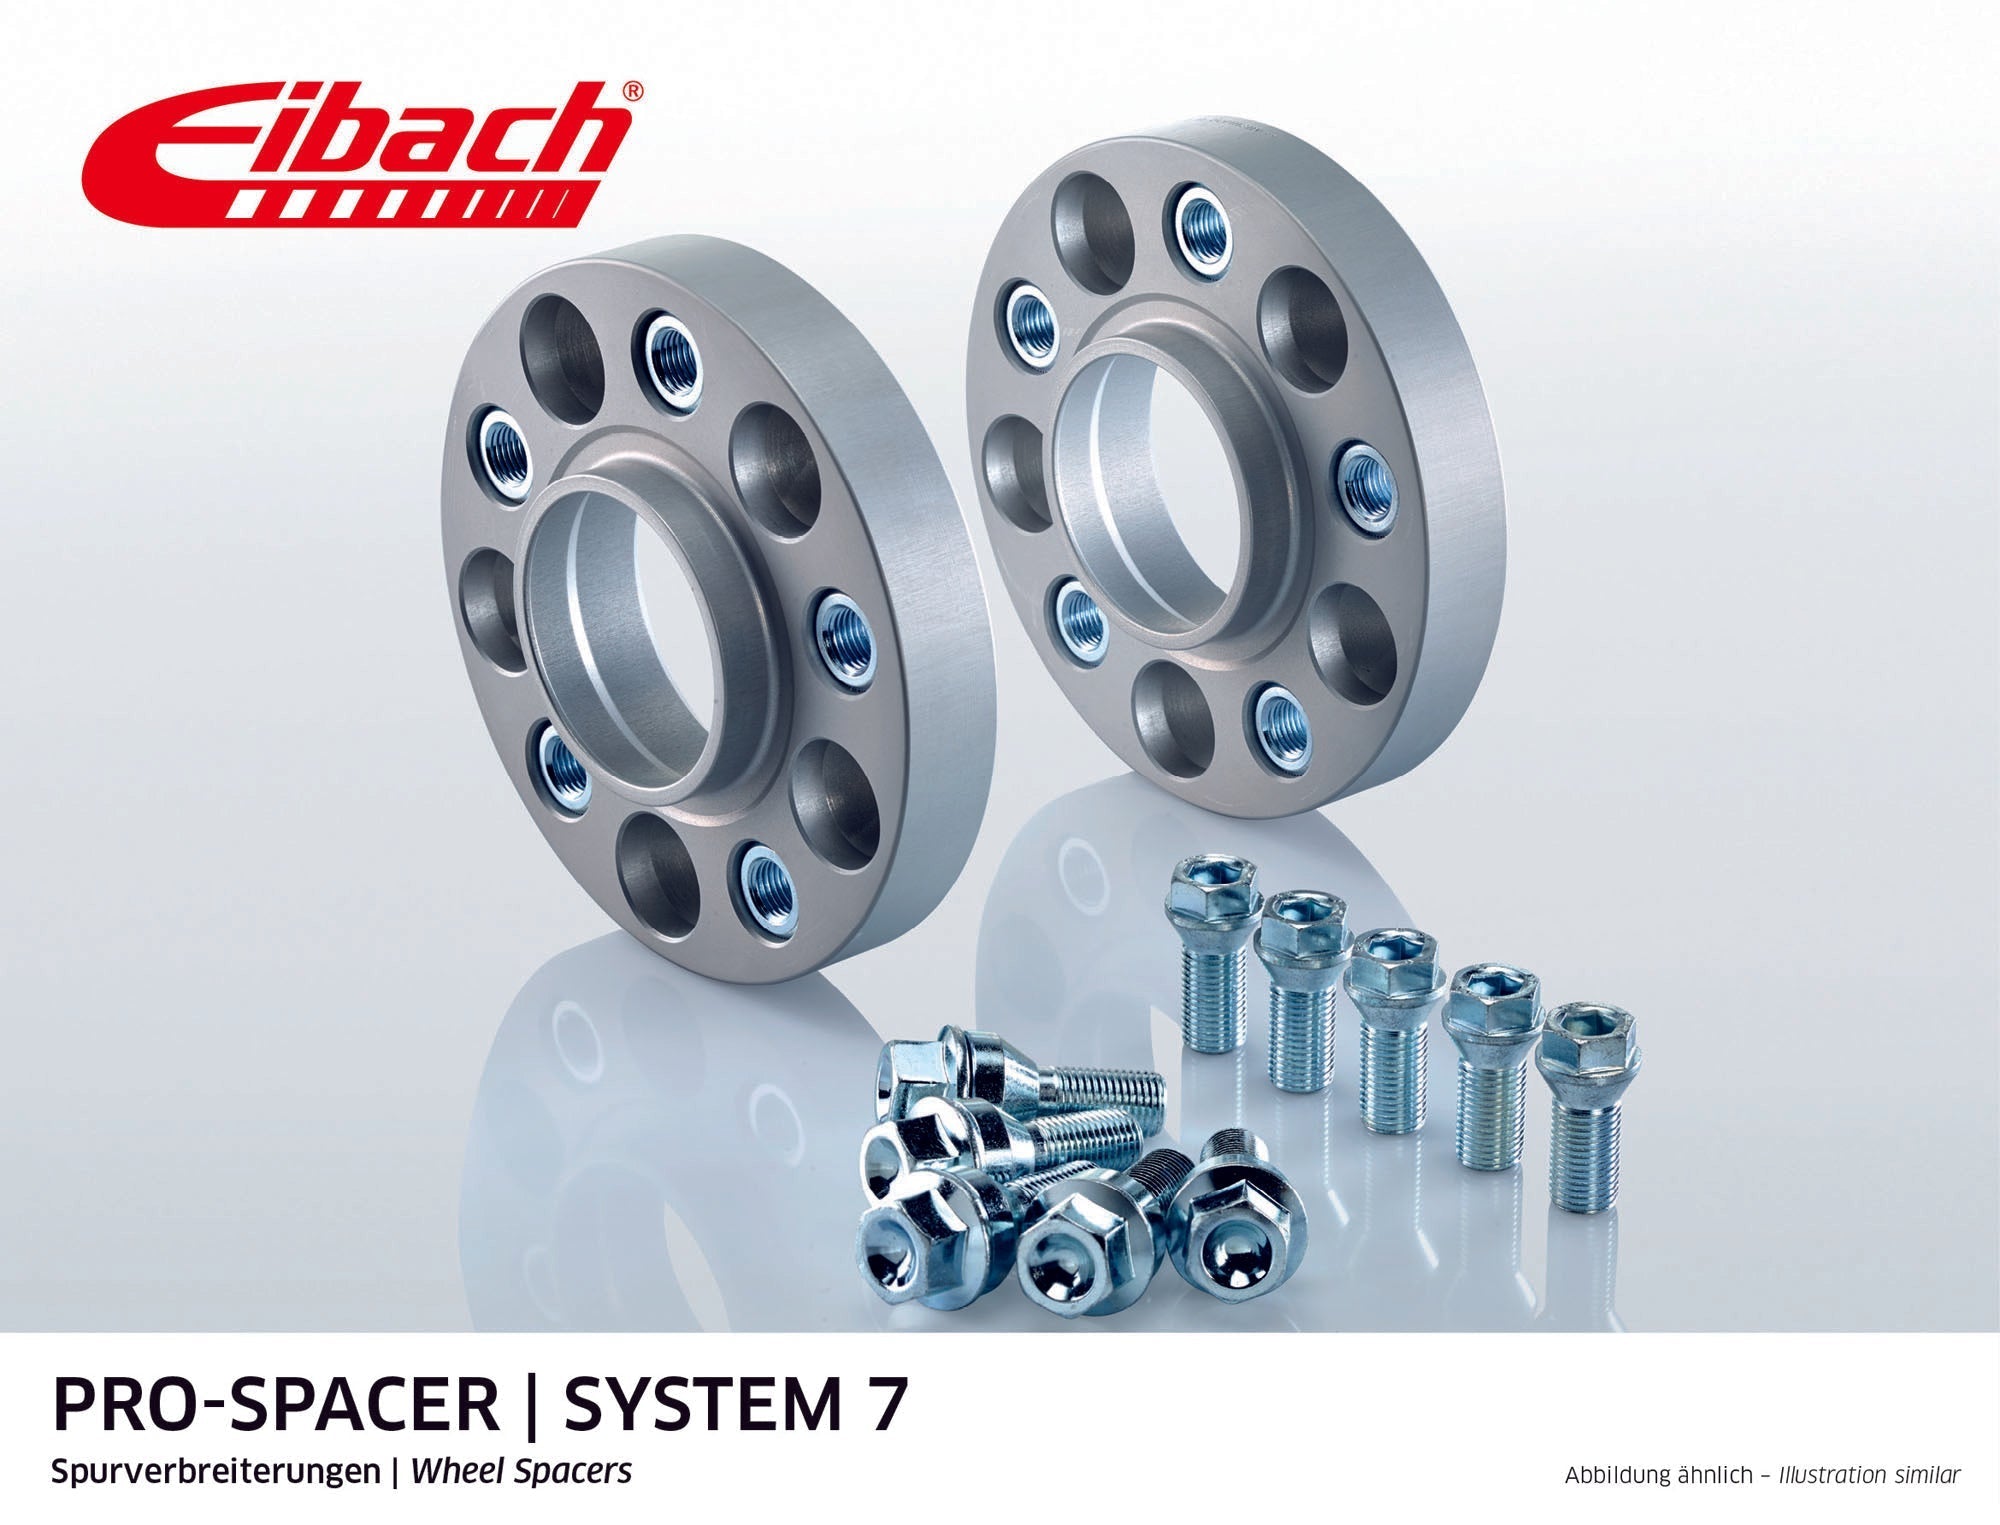 Eibach 18mm Pro-Spacer - Silver Anodized Wheel Spacer BOXSTER 2004-11 #S90-7-18-001